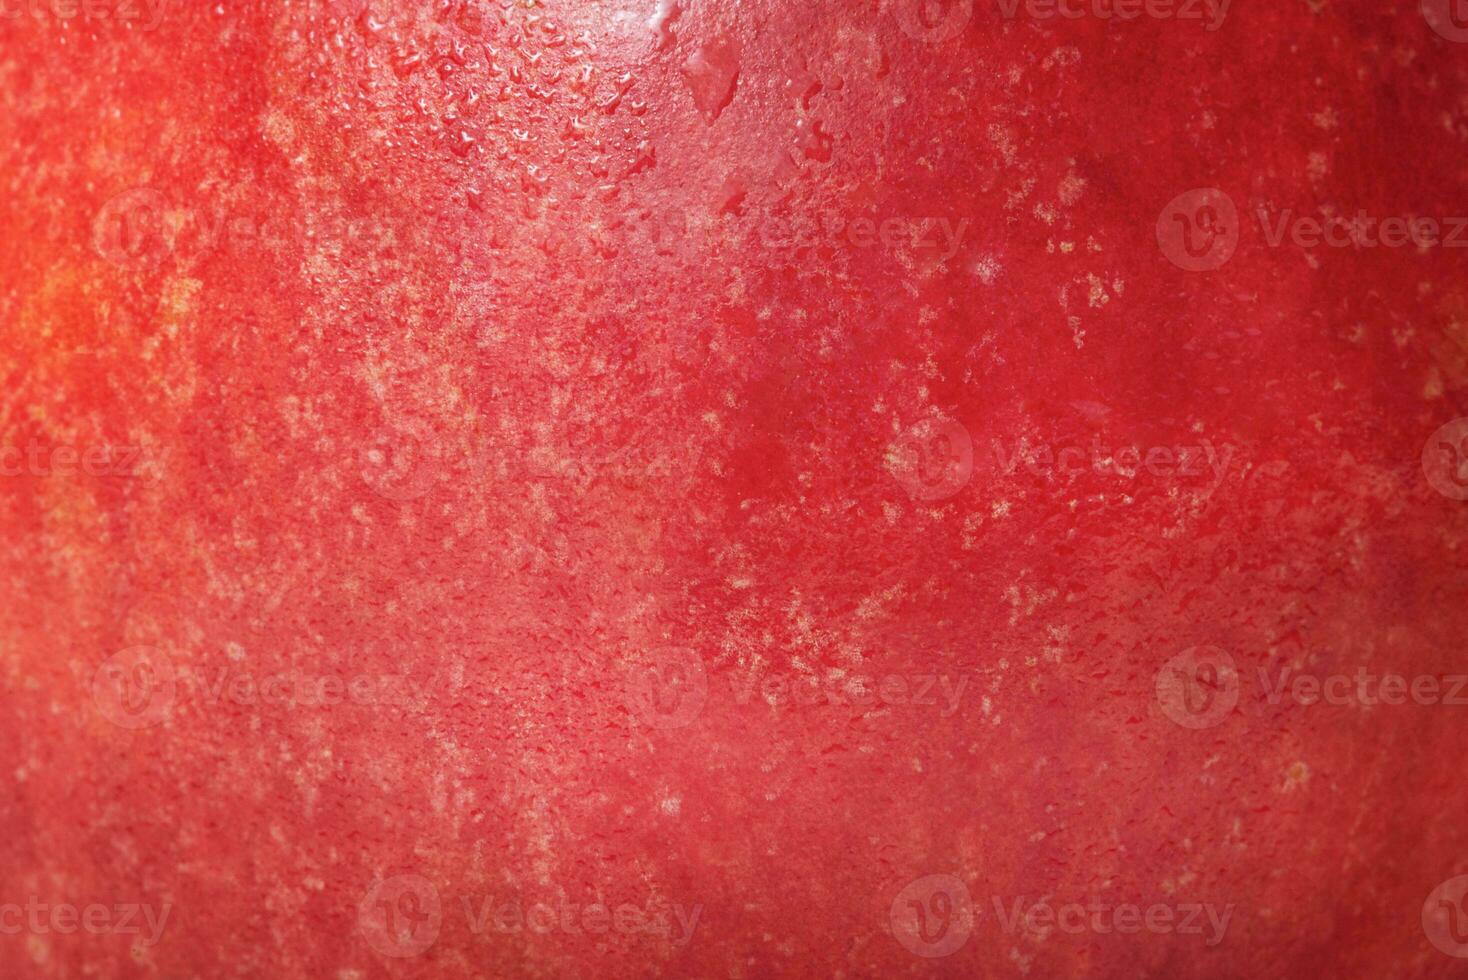 Texture of a red and yellow apple as a background. Macro photo of an apple. Healthy food, fruit.